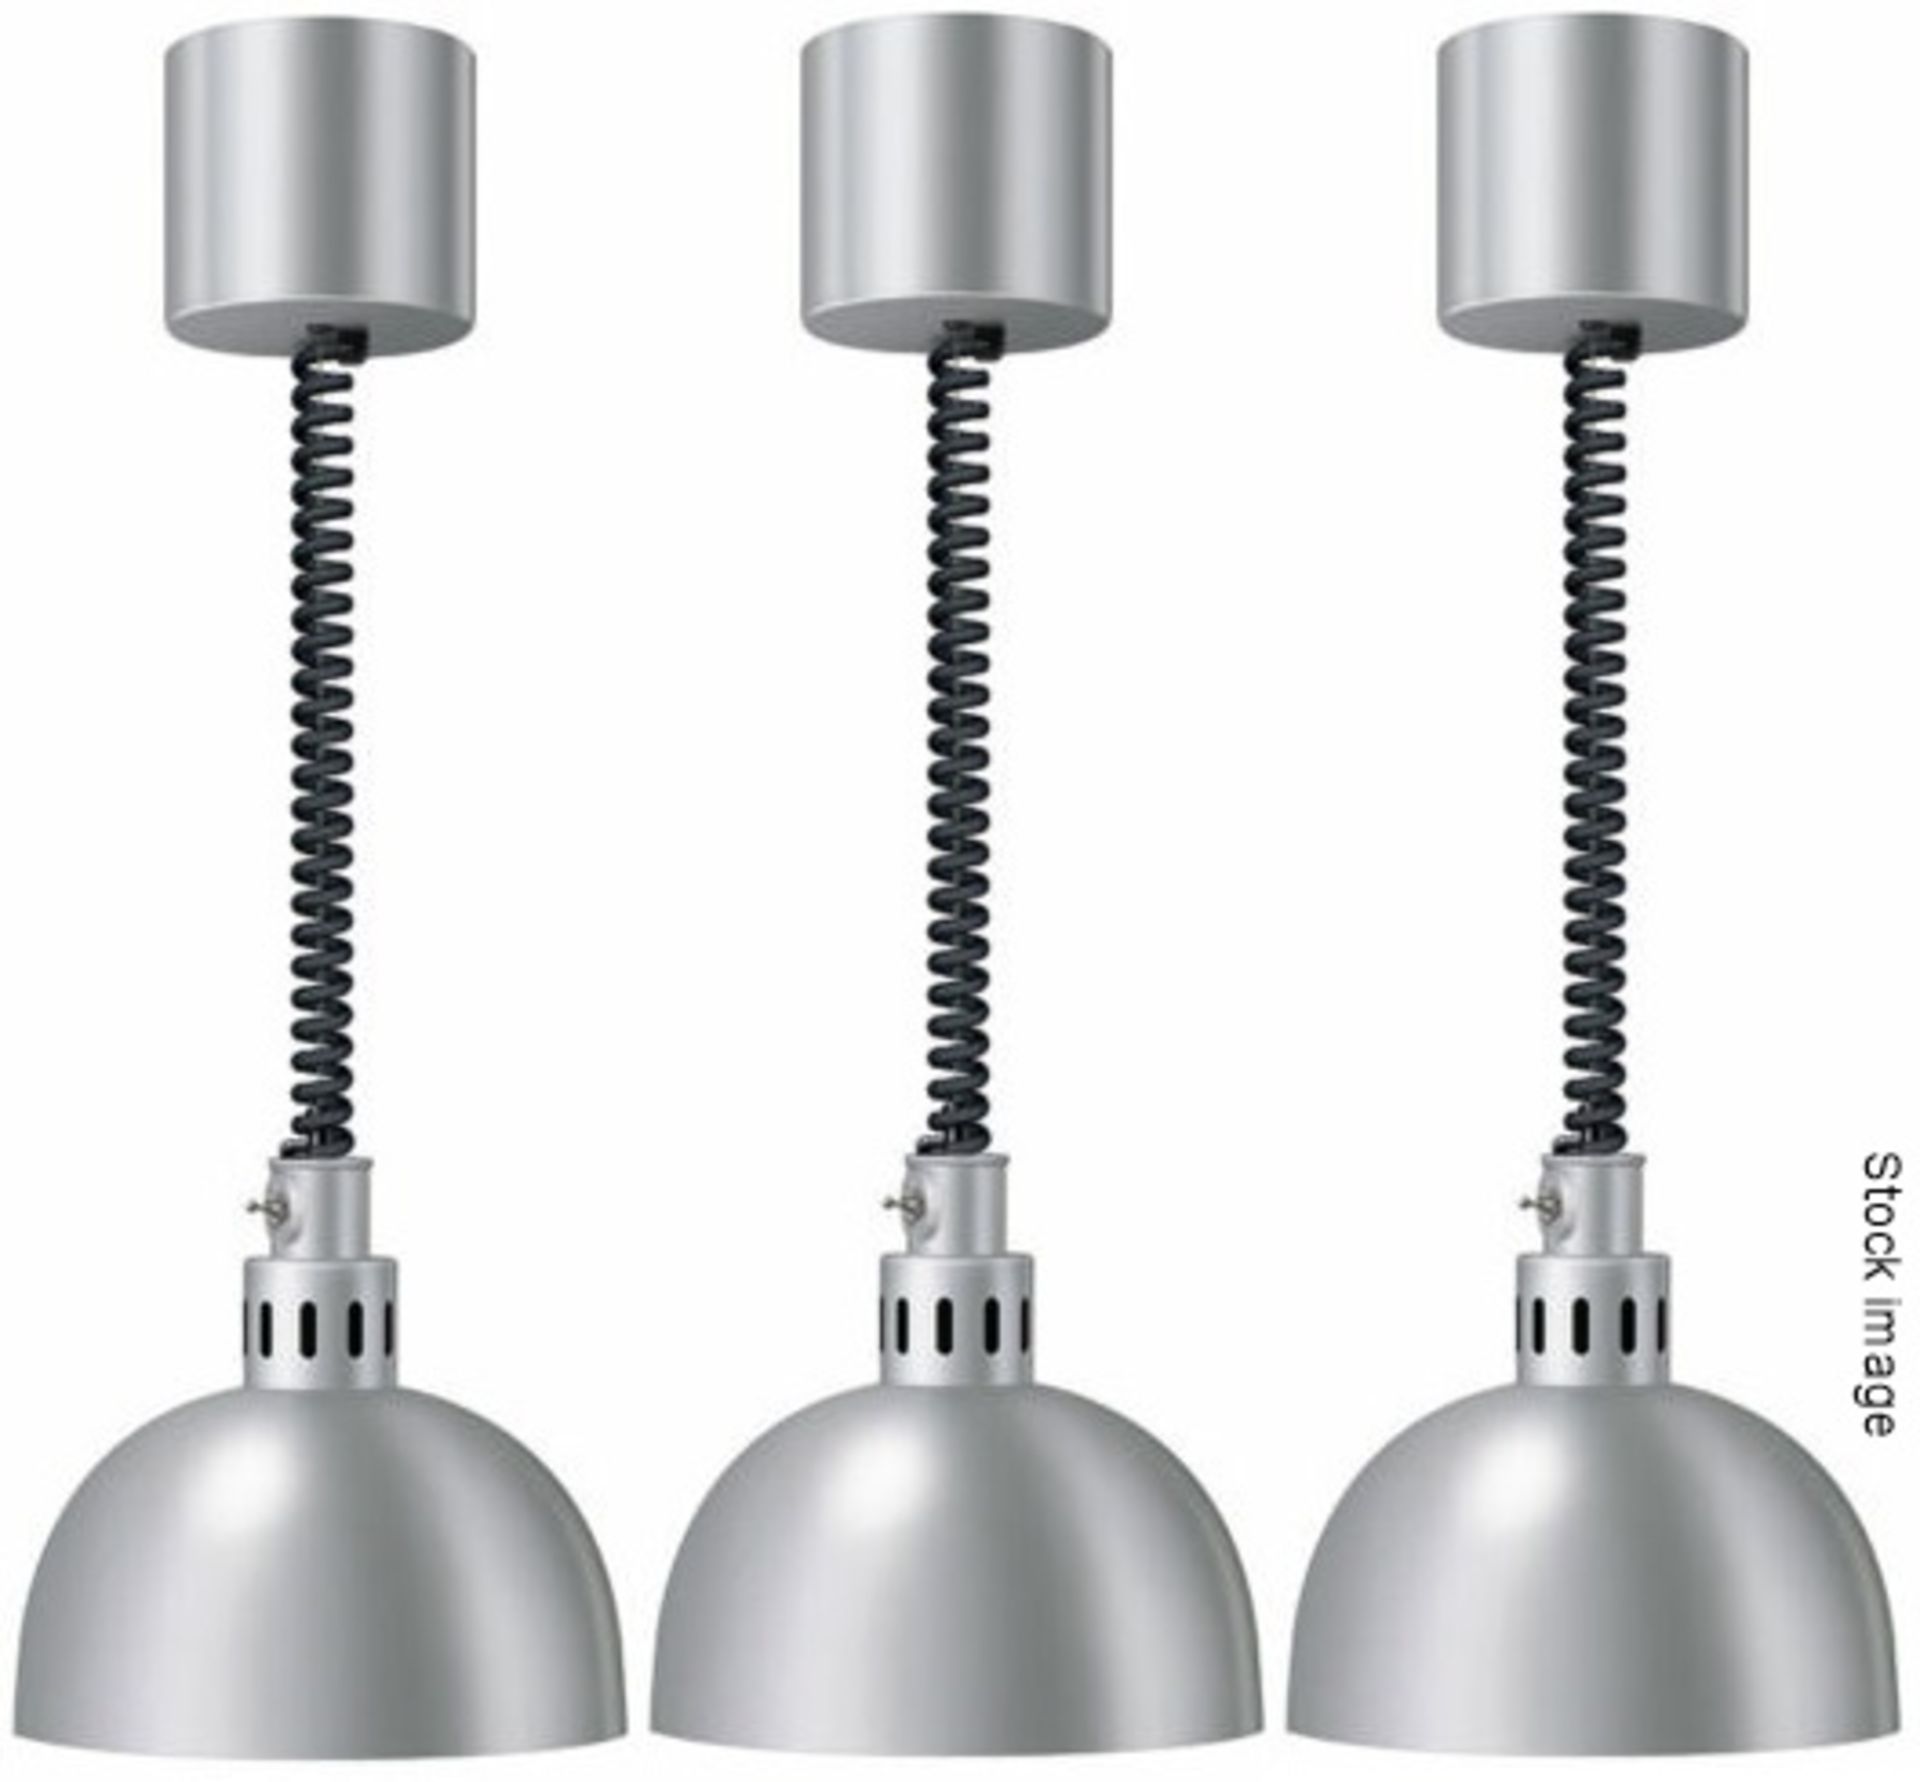 3 x HATCO Individual Commercial Restaurant Food Warming Heat Lamps In Chrome - Original RRP £1,800